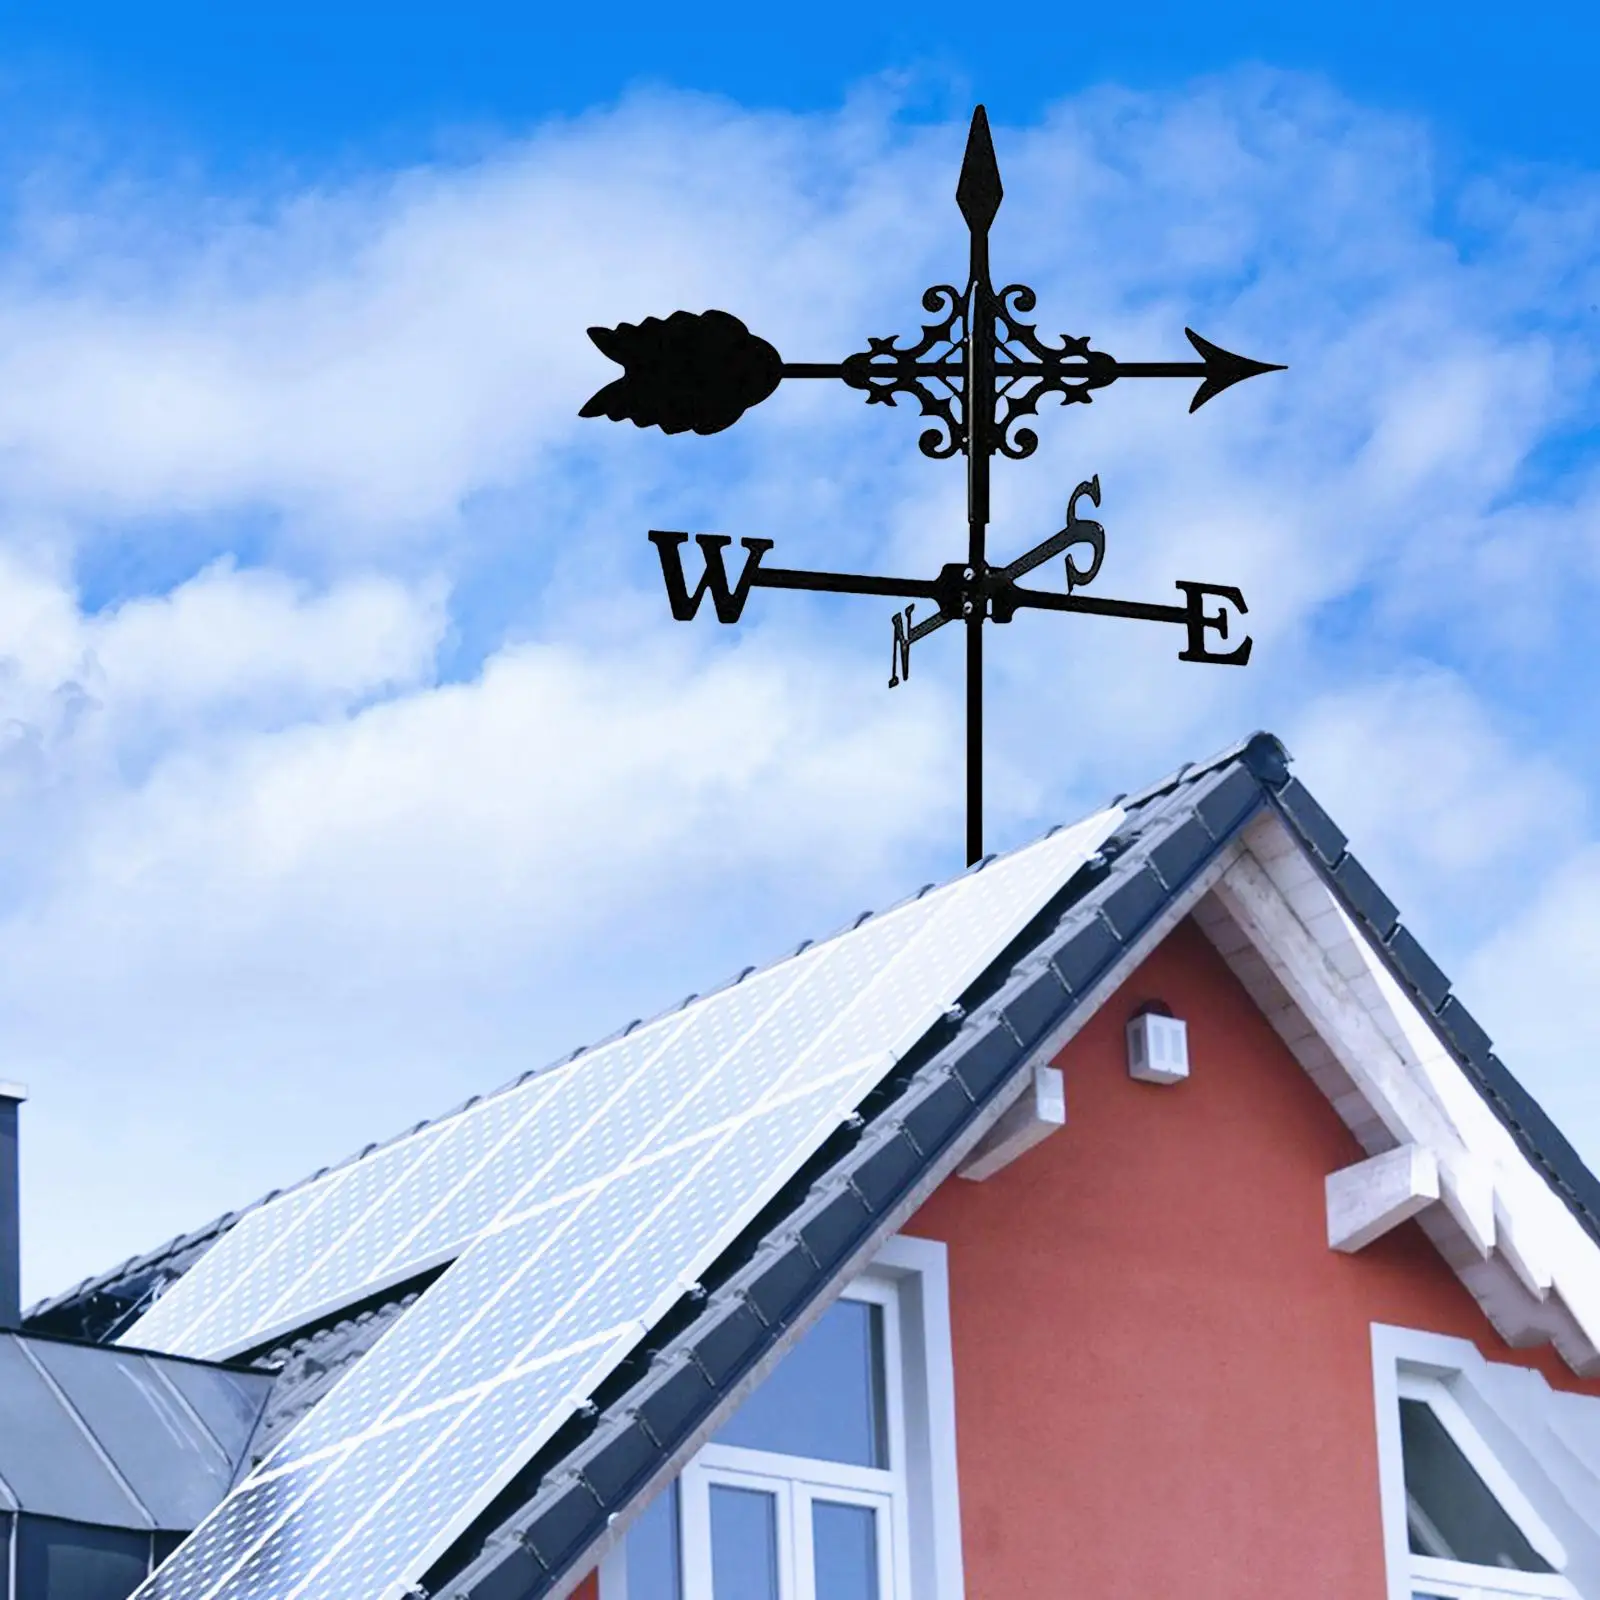 Classic Weather Vane with Silhouette Figurine Roof Mount Measuring Tools Wind Direction Indicator for Yard Farm Garage Ornament